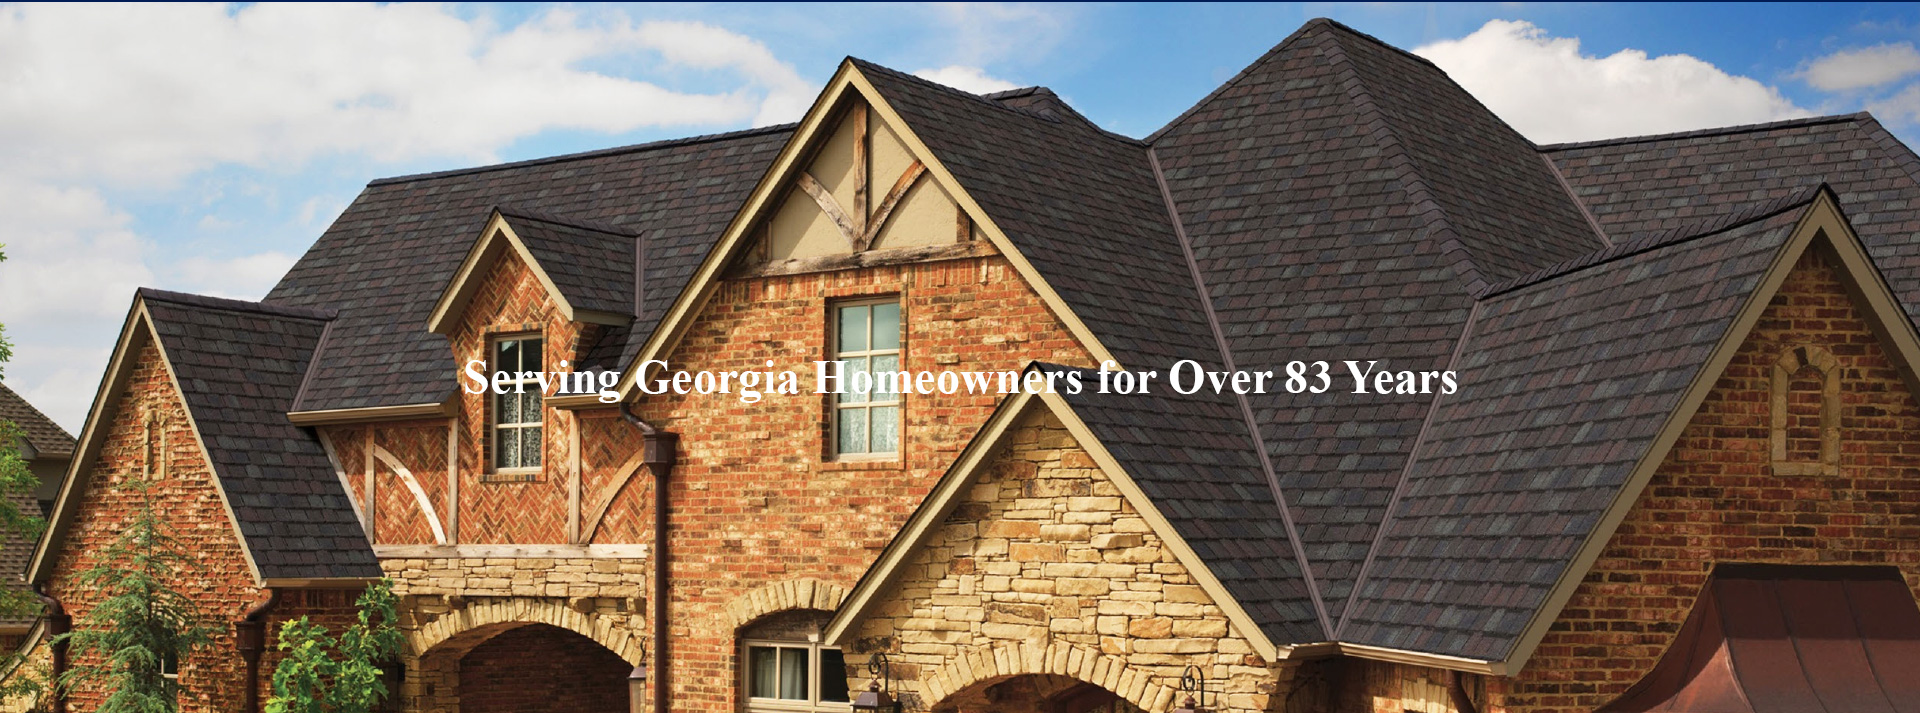 Serving Georiga Homeowners for Over 83 Years